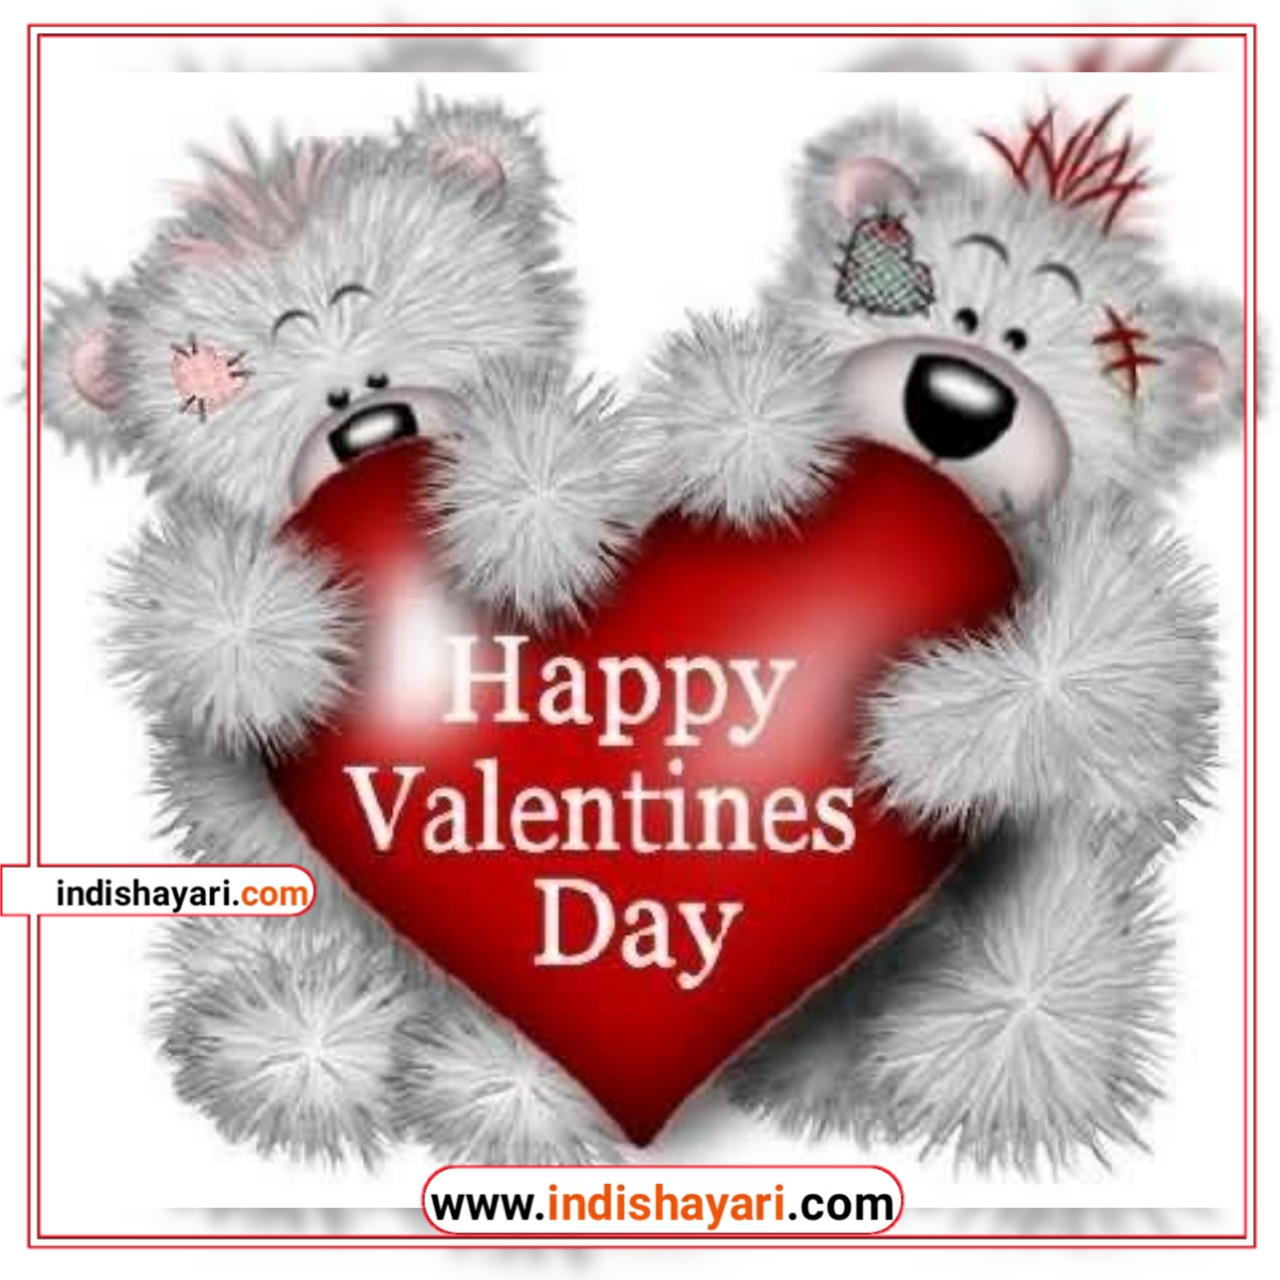 1000+ Happy Valentine's Day Quotes whishes greetings sms  images for whatsapp Facebook Instagram status